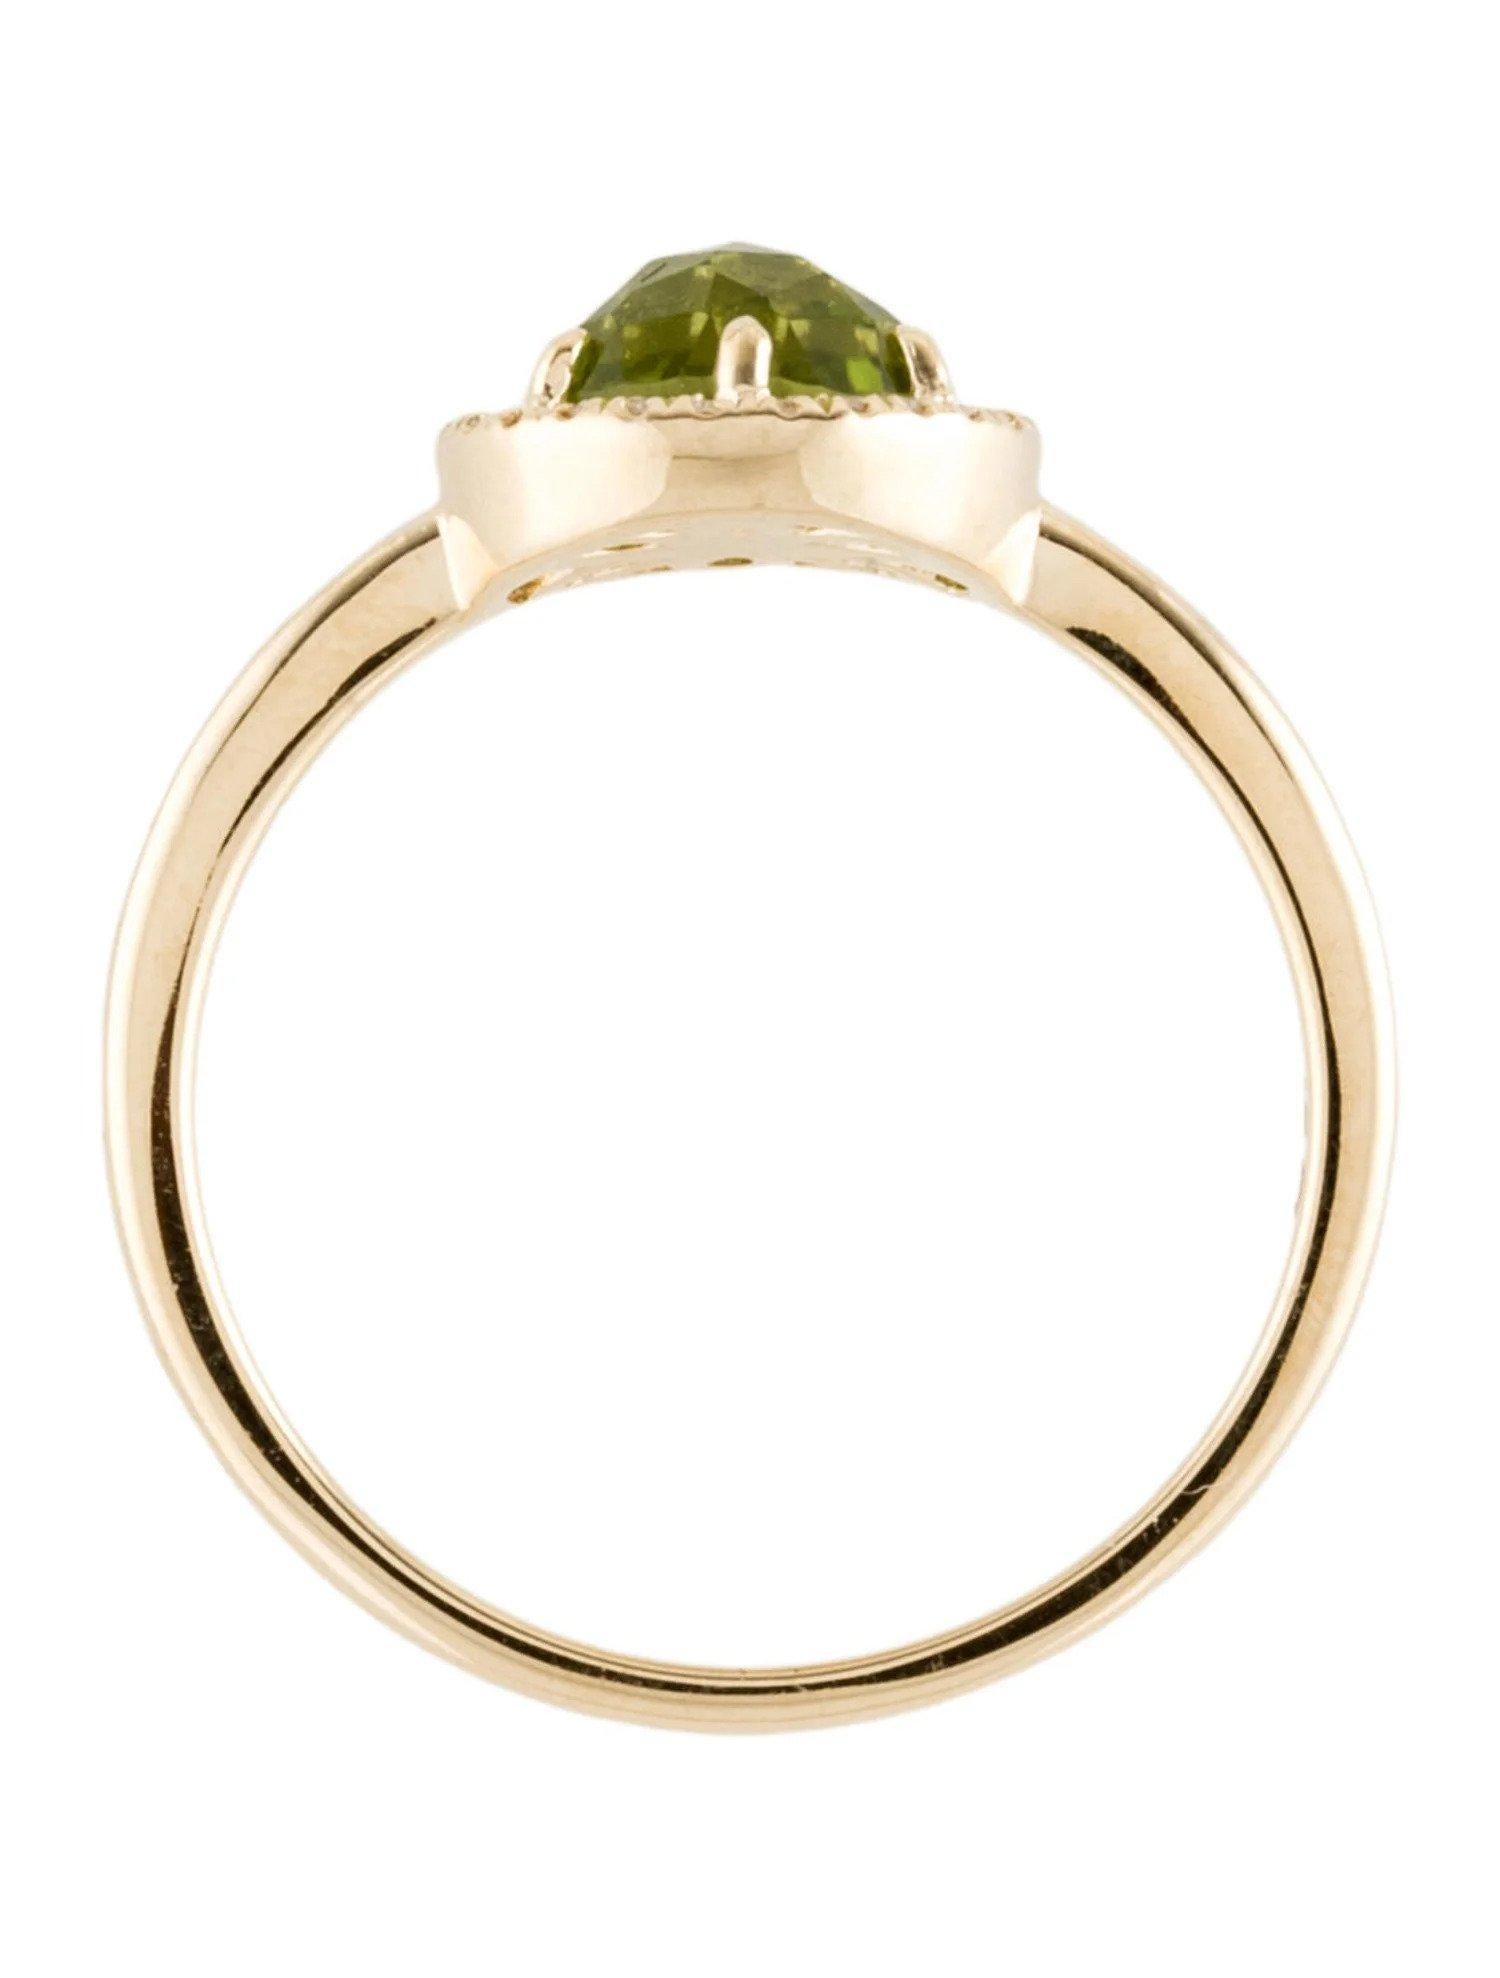 1.31 Carat Round Peridot & Diamond Yellow Gold Ring In New Condition For Sale In Great Neck, NY